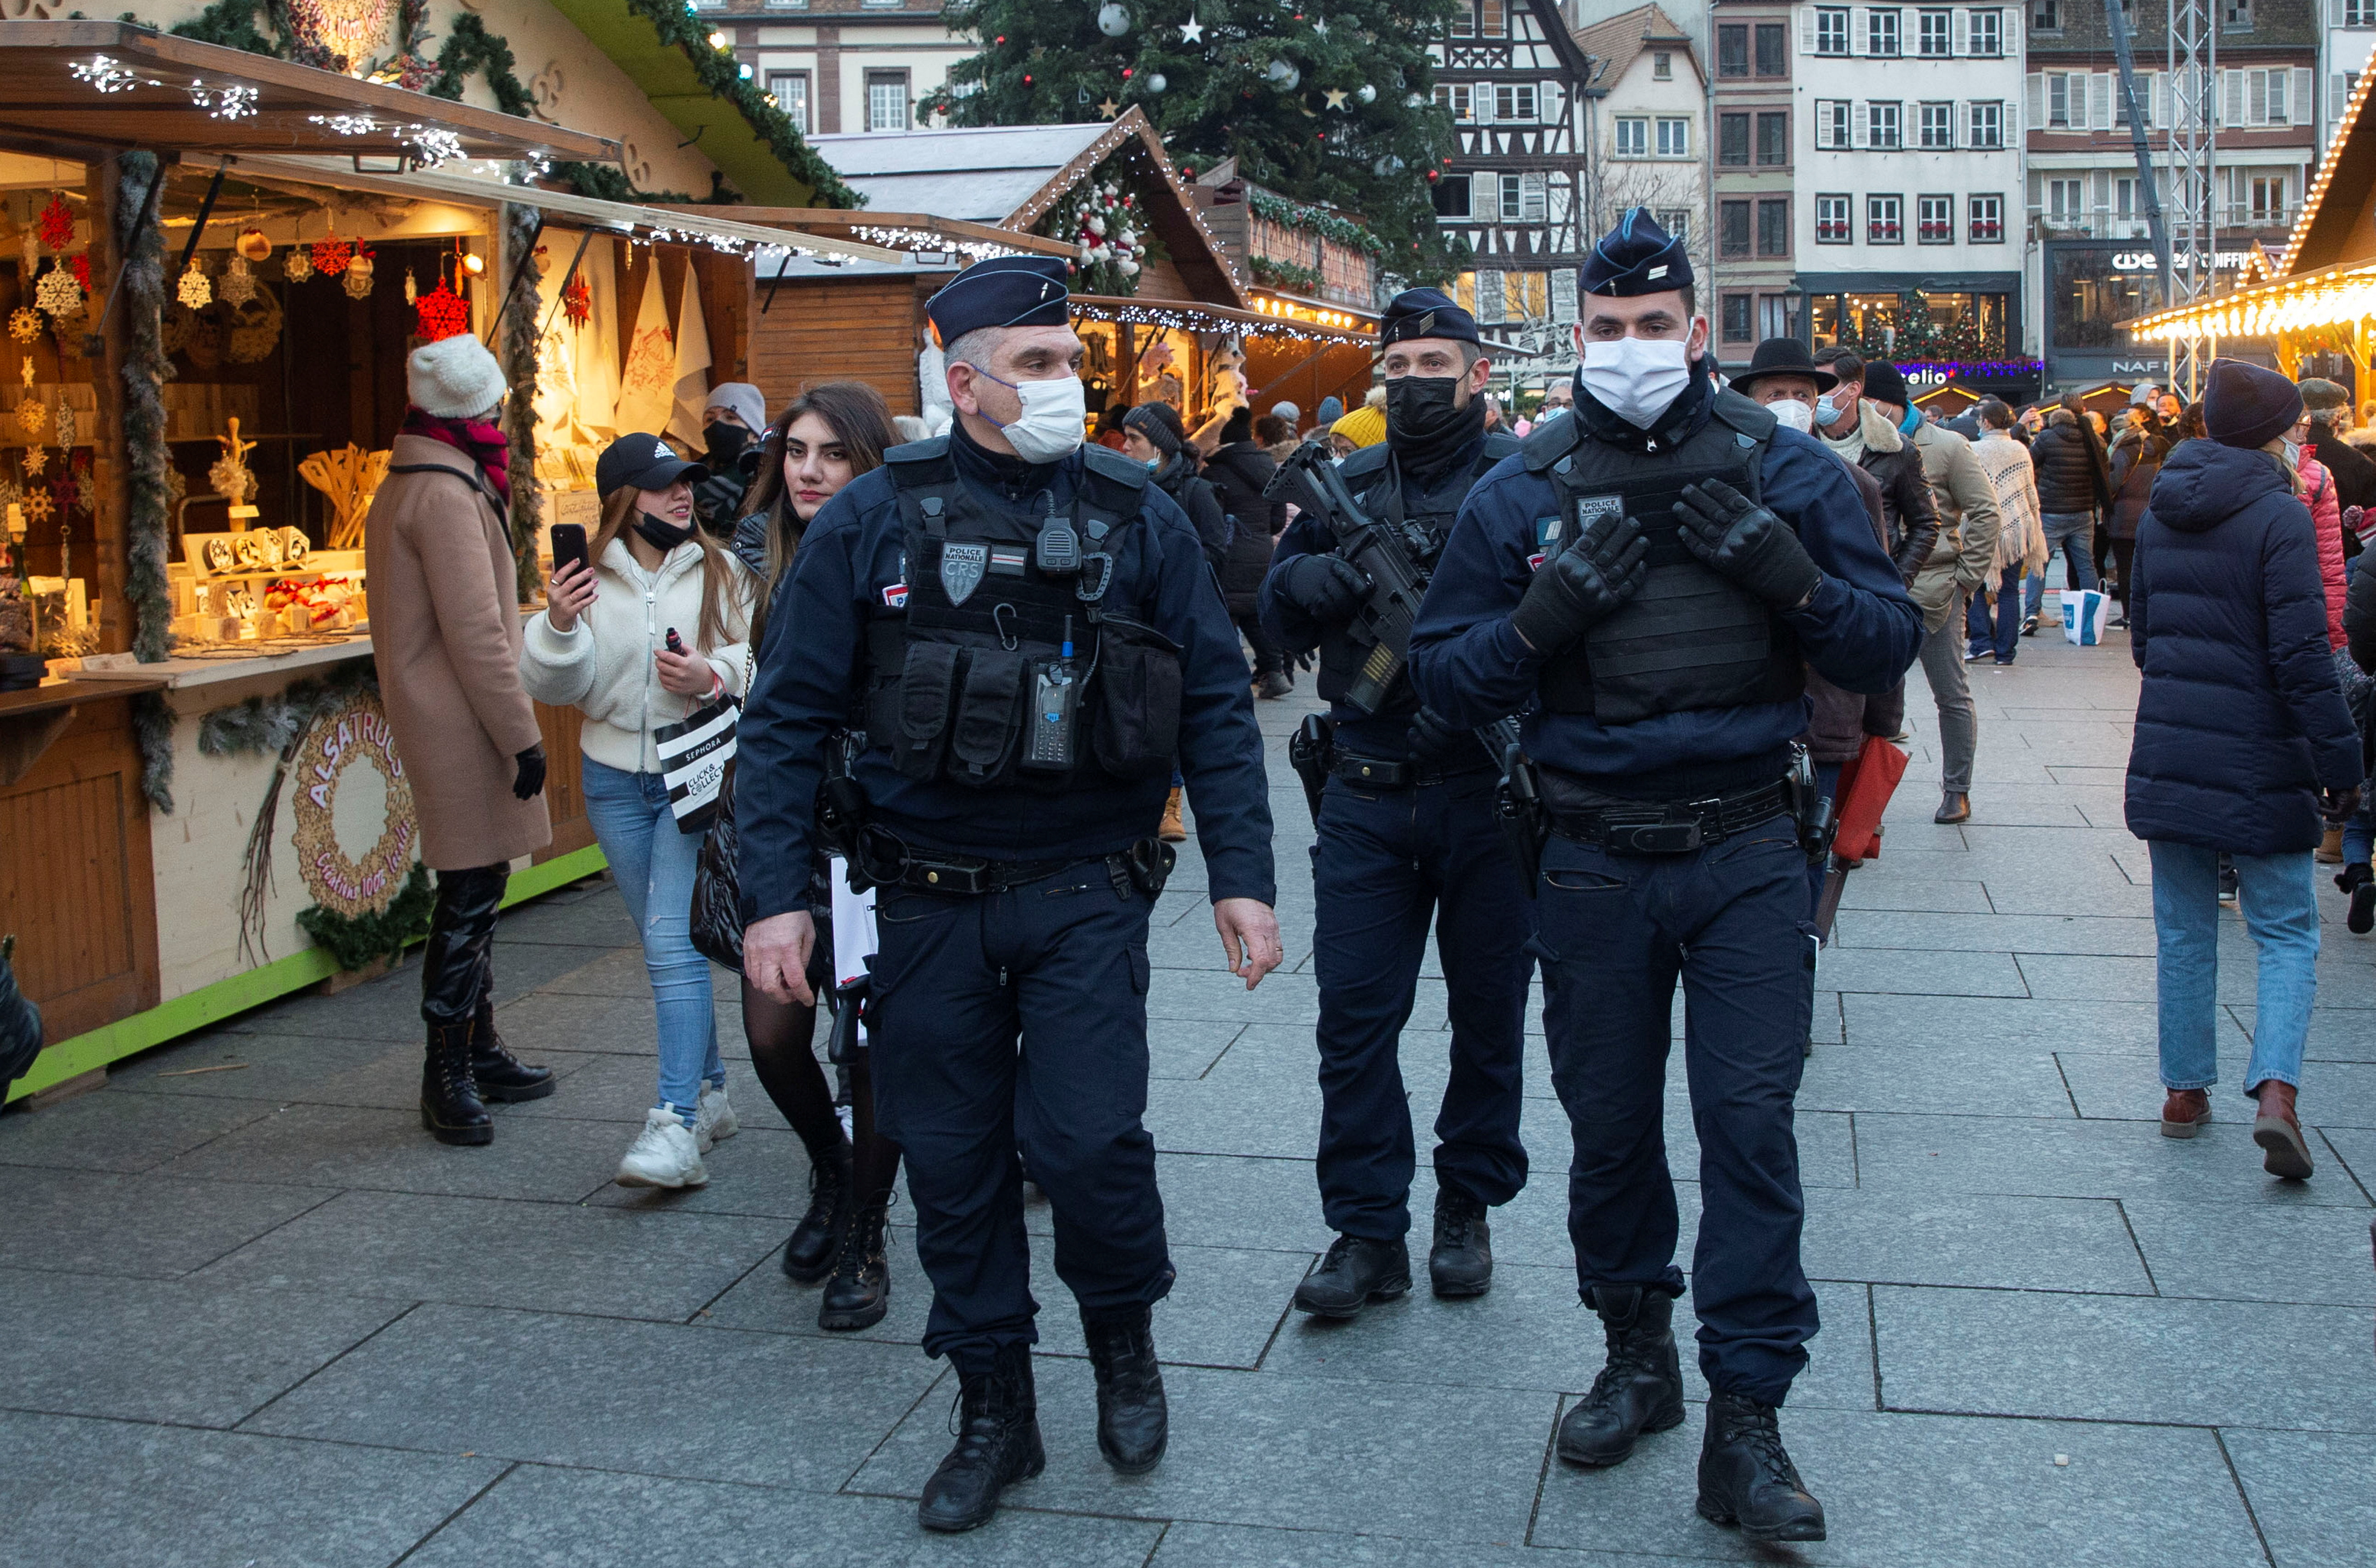 French police officers patrol at a Christmas market on the Place Kleber square in Strasbourg, France November 26, 2021. REUTERS/Arnd Wiegmann